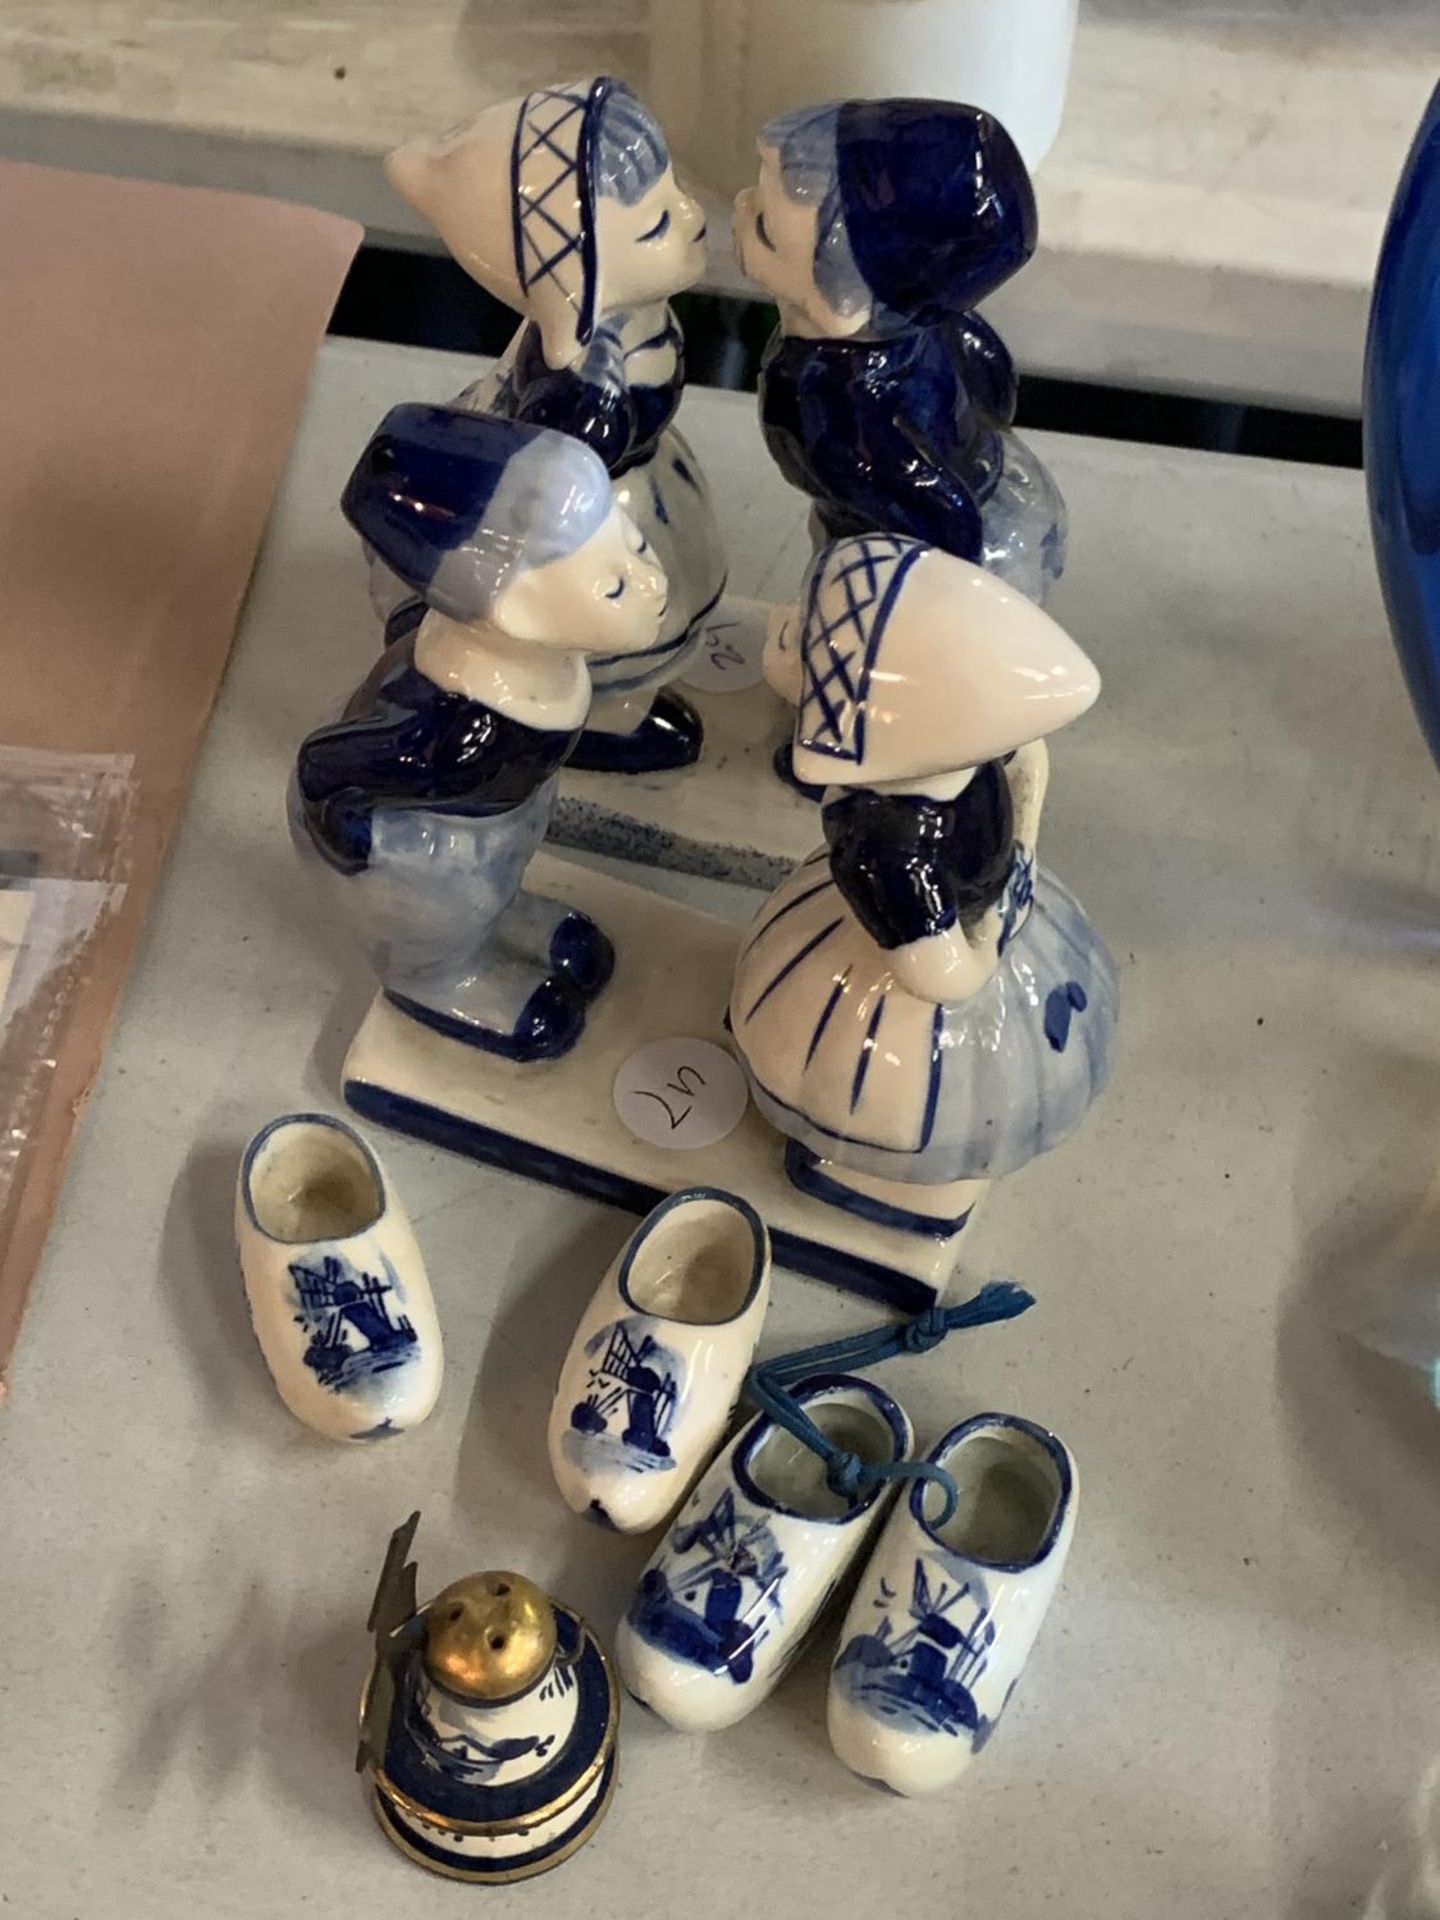 A COLLECTION OF DELFT WARE TO INLCUDE FIGURINES, CLOGS AND A WINDMILL